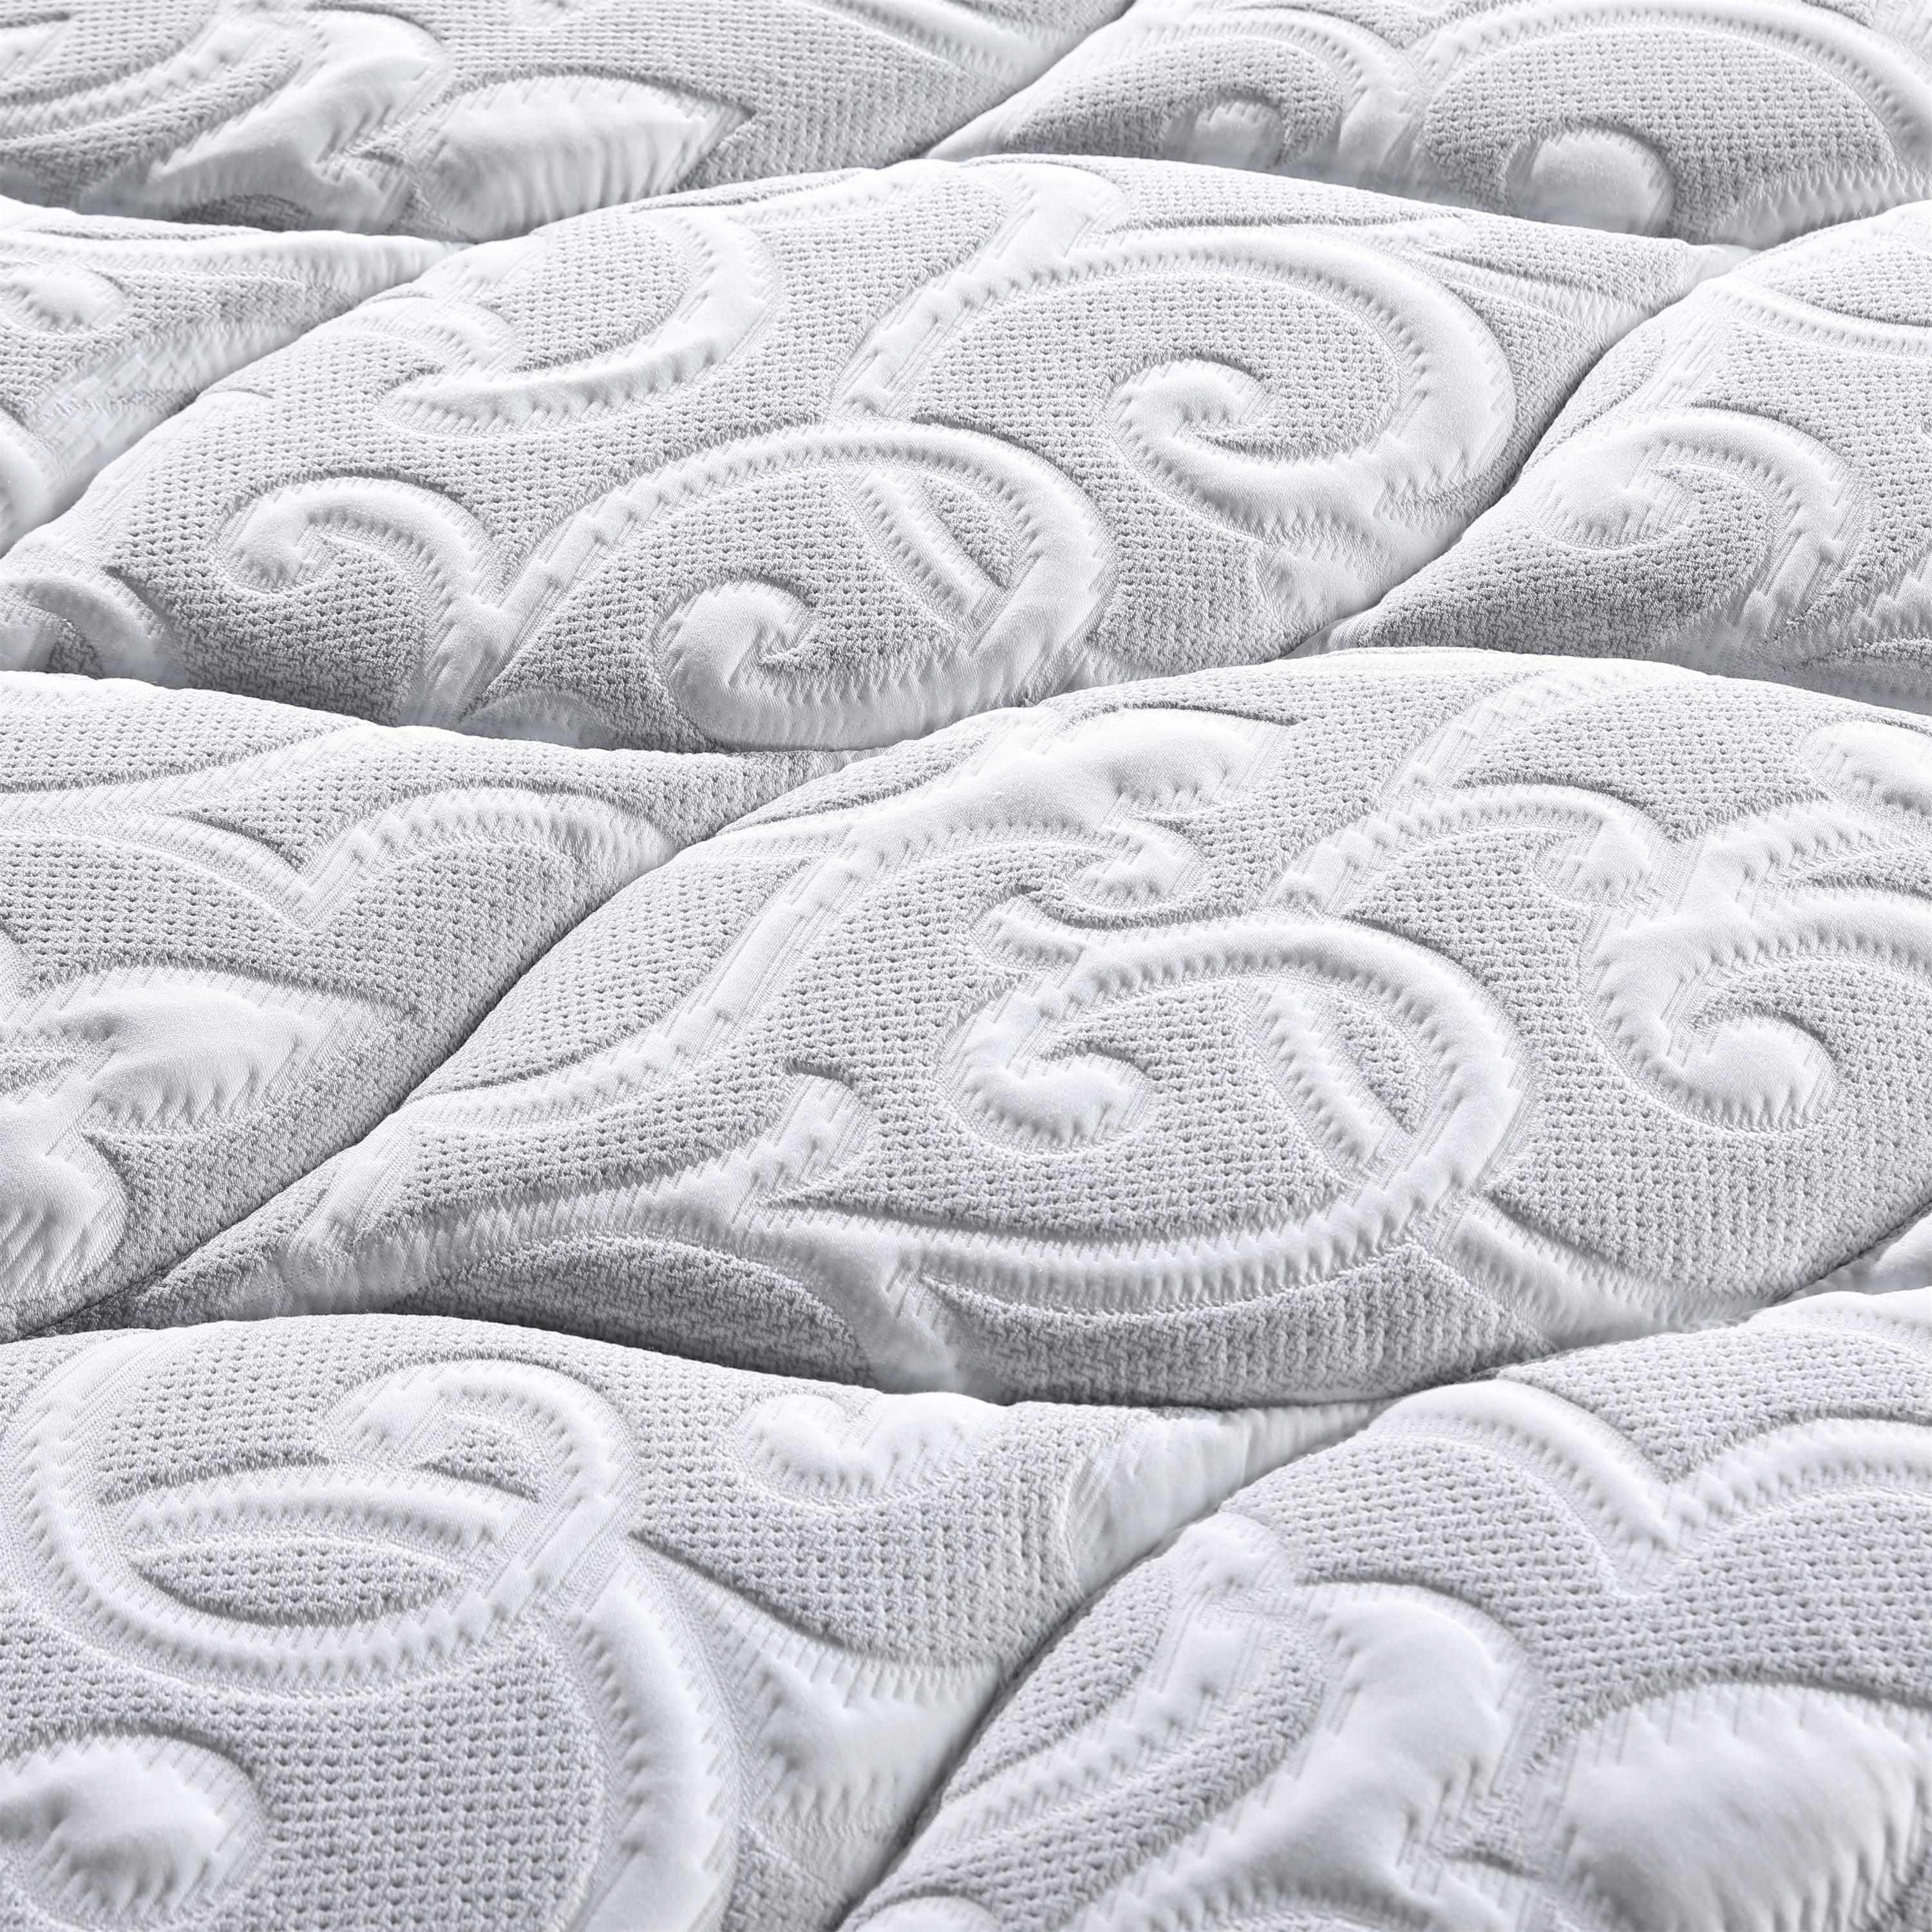 reasonable springfit mattress price with Quiet Stable Motor